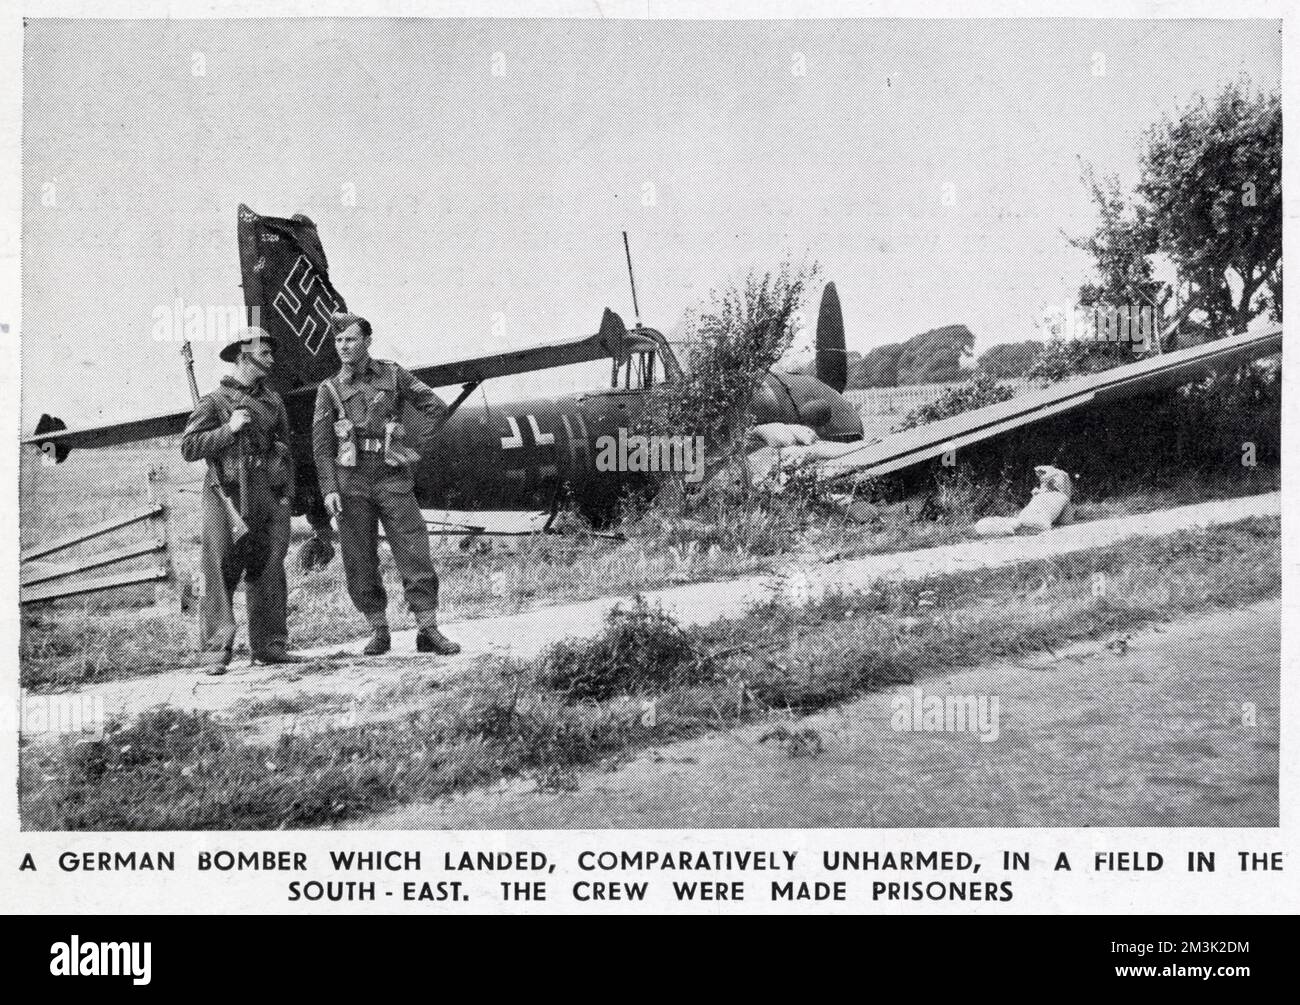 A crashed German Junkers Ju-87 dive-bomber, also known as a 'Stuka', somewhere in South East England during the summer of 1940. Two British soldiers are seen guarding the crashed airplane. Stock Photo